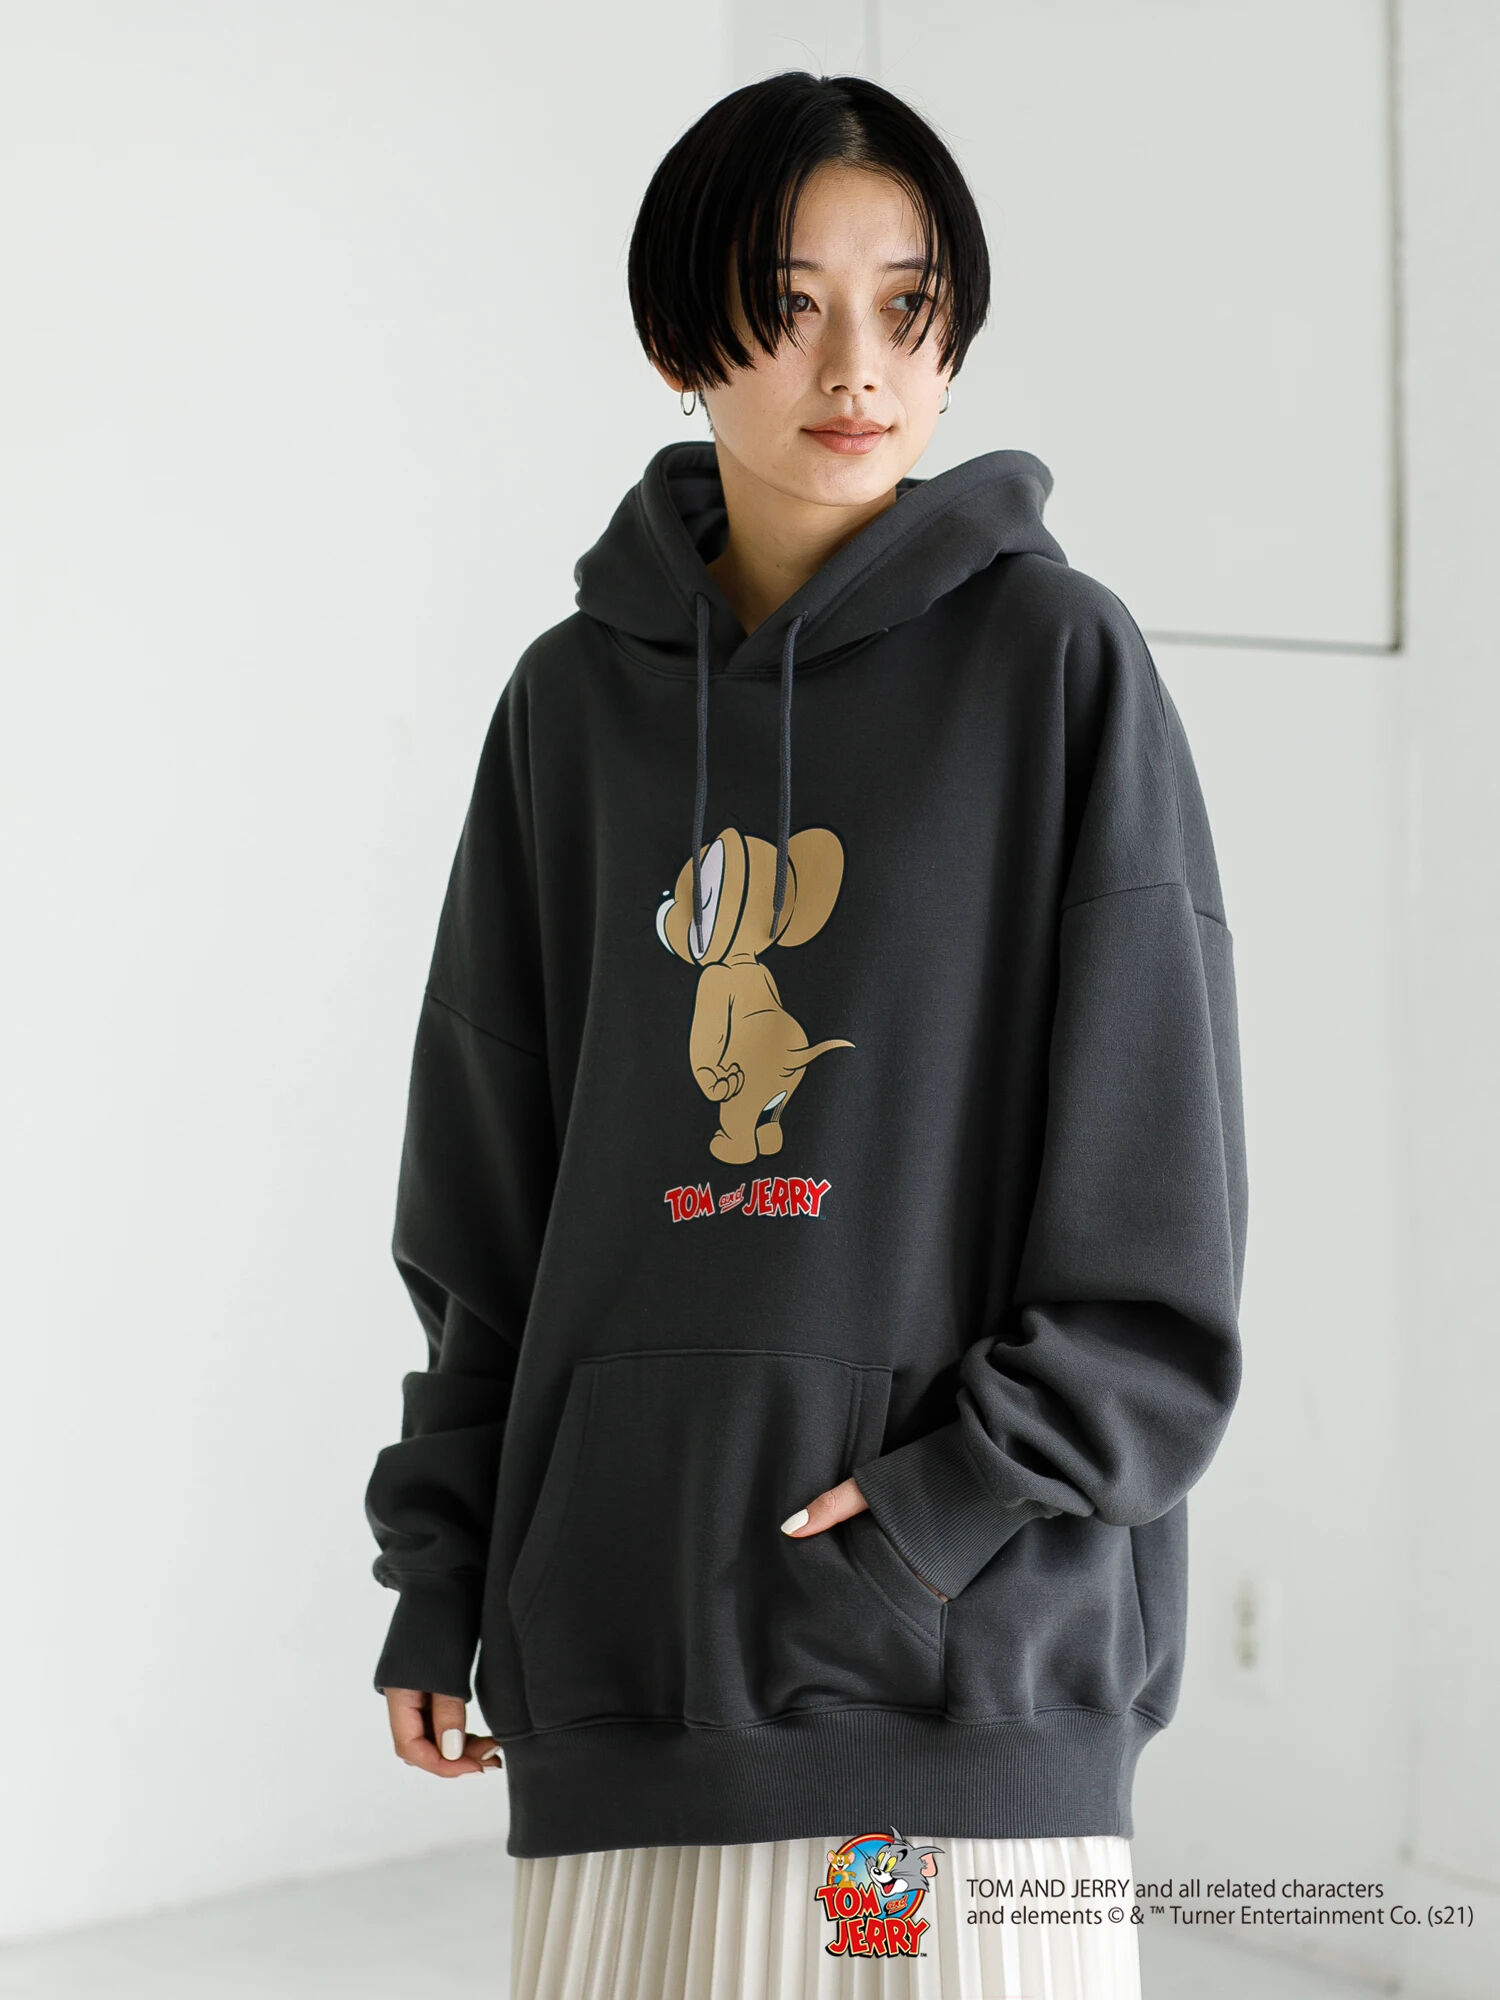 Tom and Jerry Back hoodie